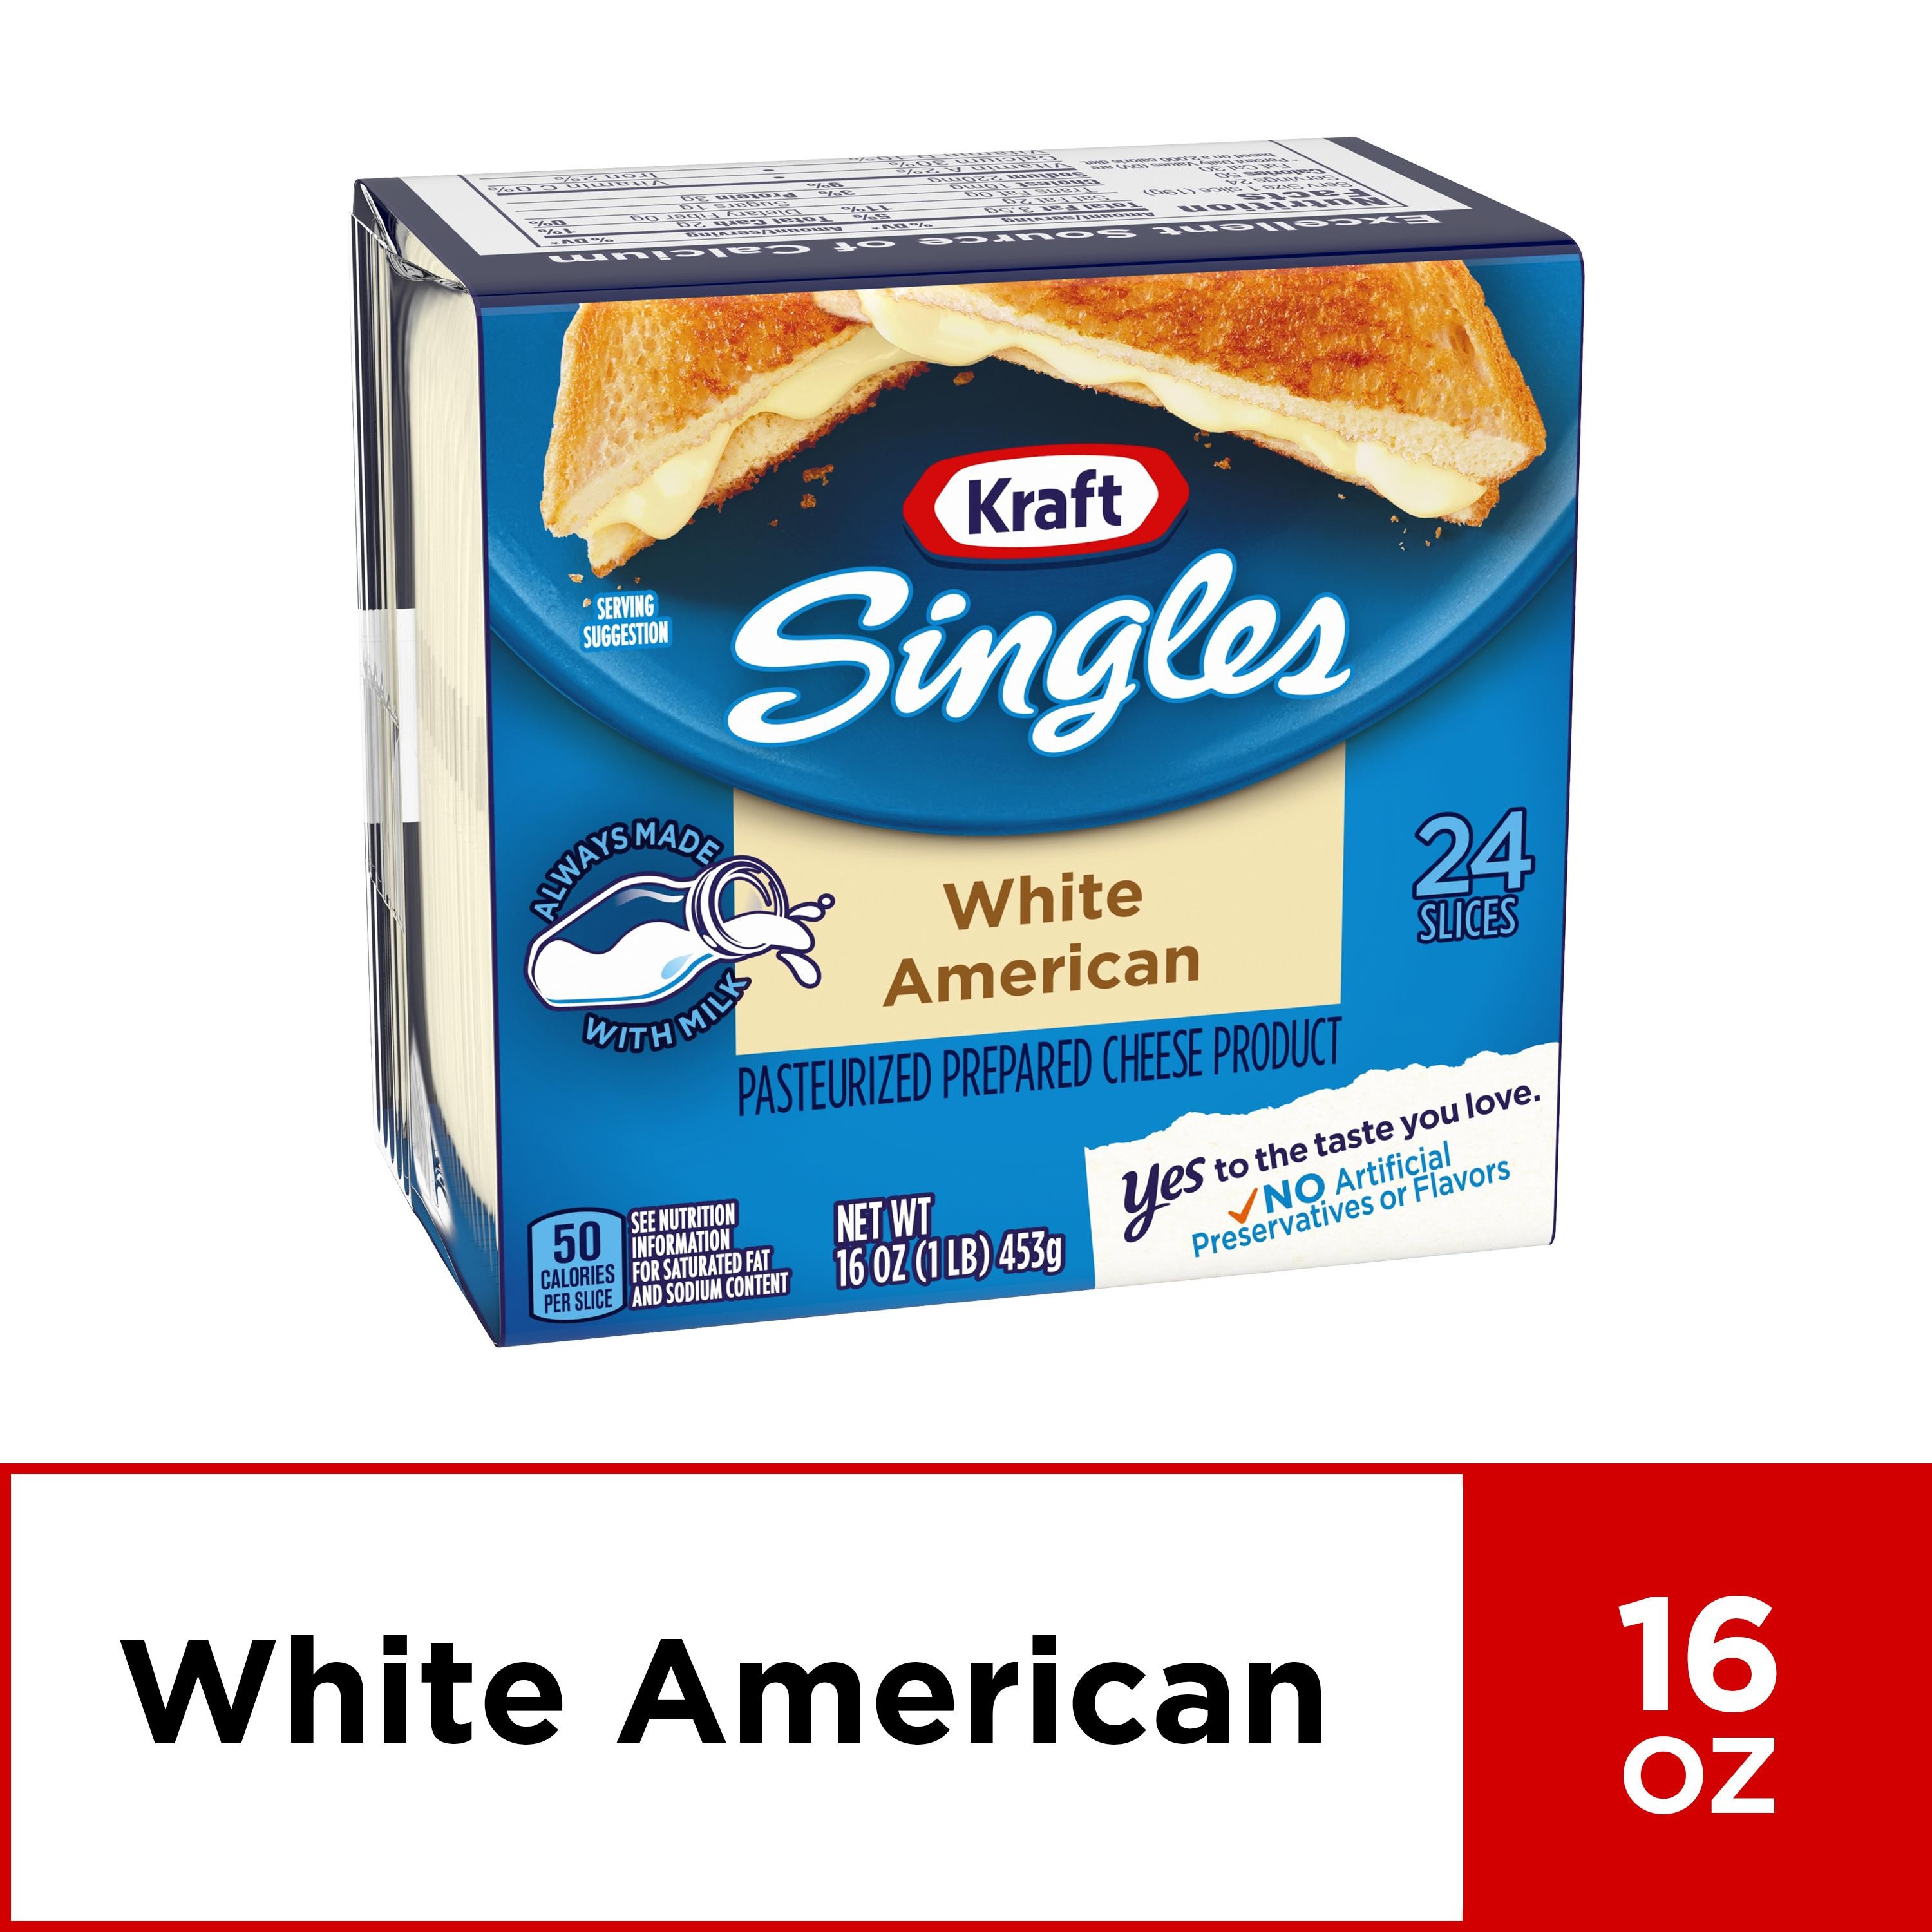 Singles White American Pasteurized Prepared Cheese Product